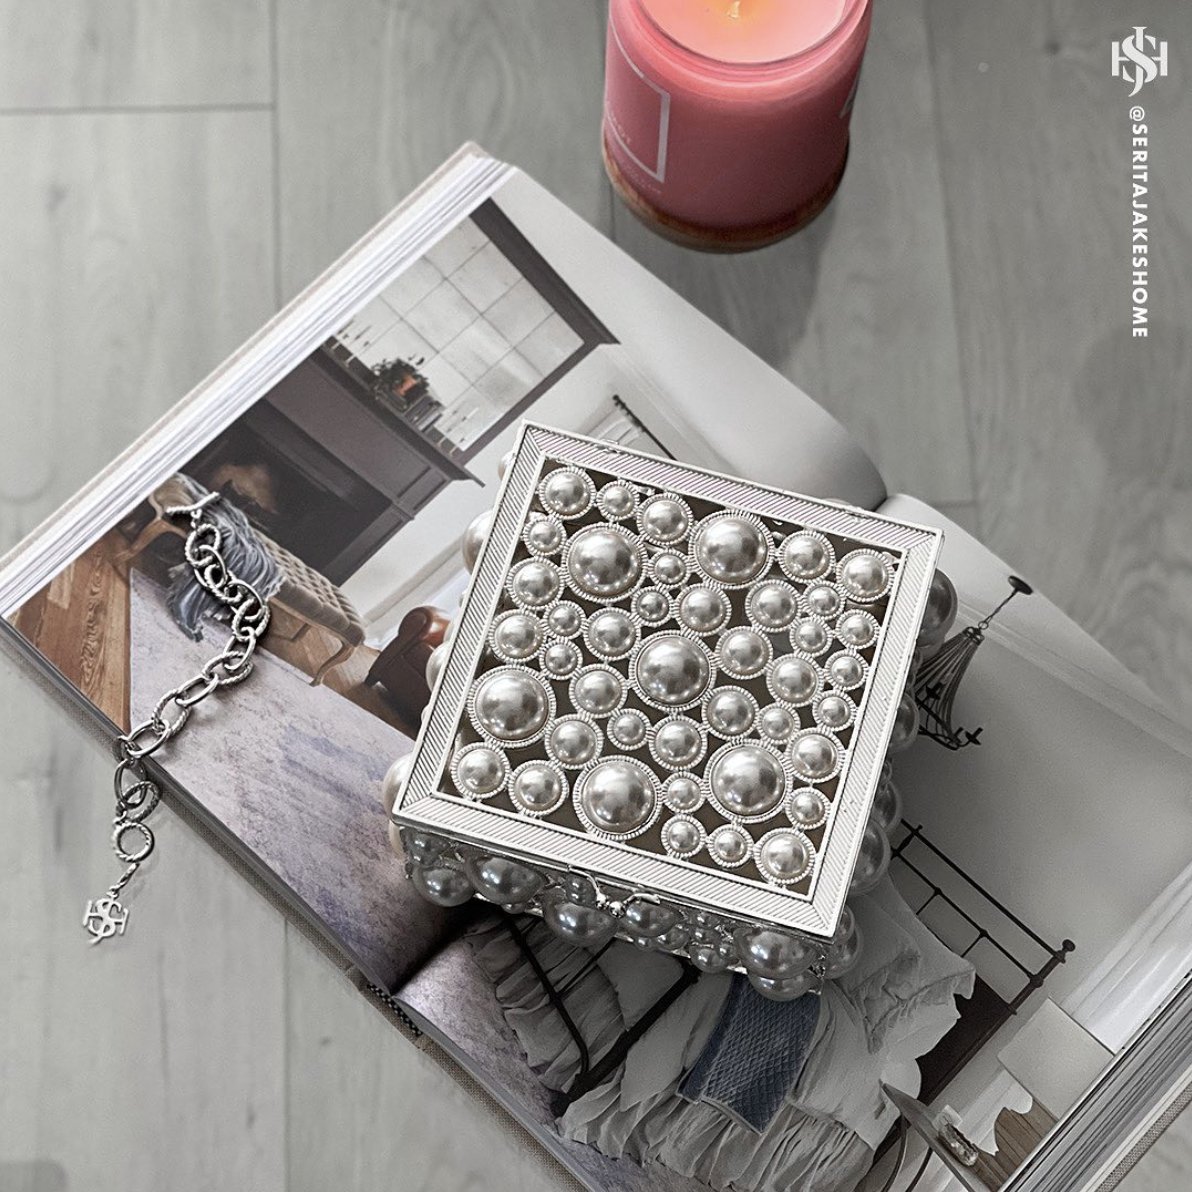 The details matter at @SeritaJakesHome! ✨ 

A gift fit for a queen, the Pearl Dreams Box exudes grandeur, lending to the regality of her #sacredspace.

 Shop now at SeritaJakesHome.com 

#MySacredHome #SeritaJakesHome